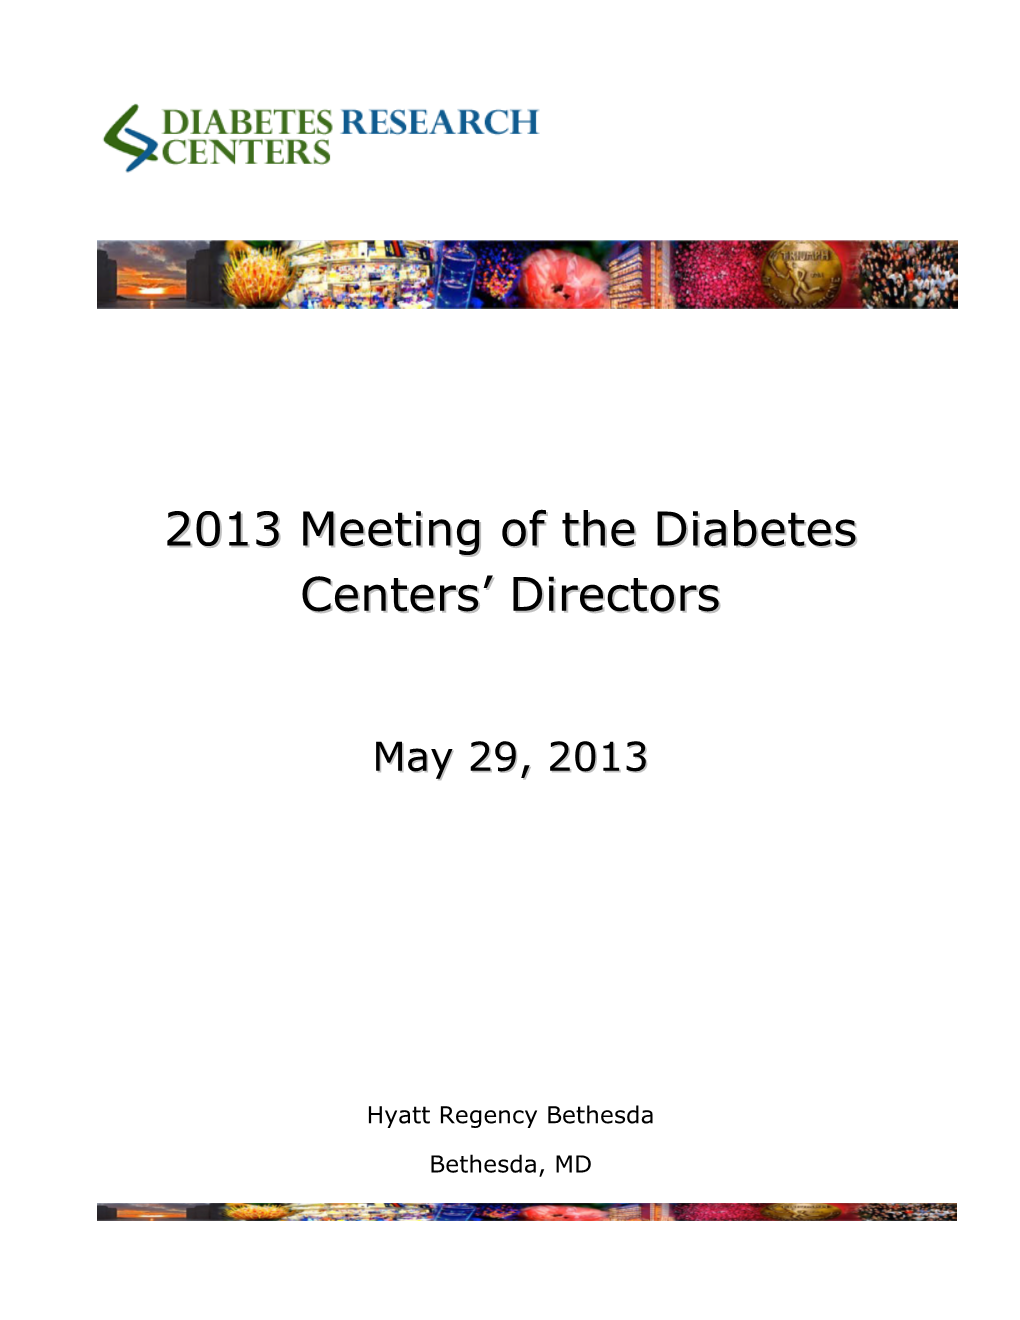 2013 Meeting of the Diabetes Centers' Directors